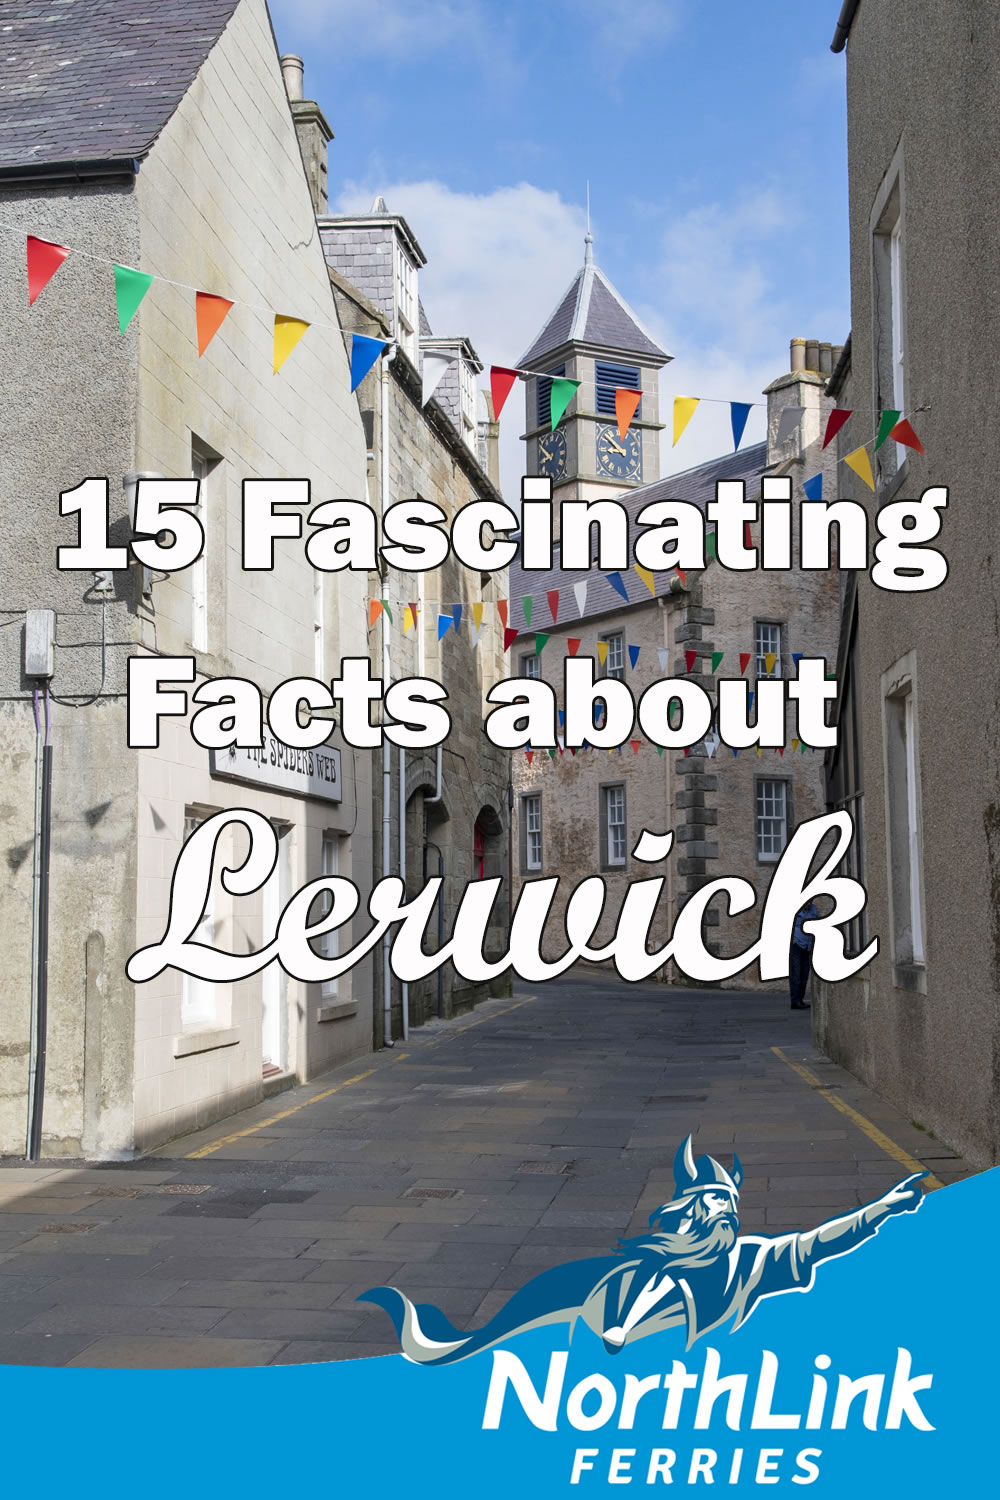 15 Fascinating Facts about Lerwick